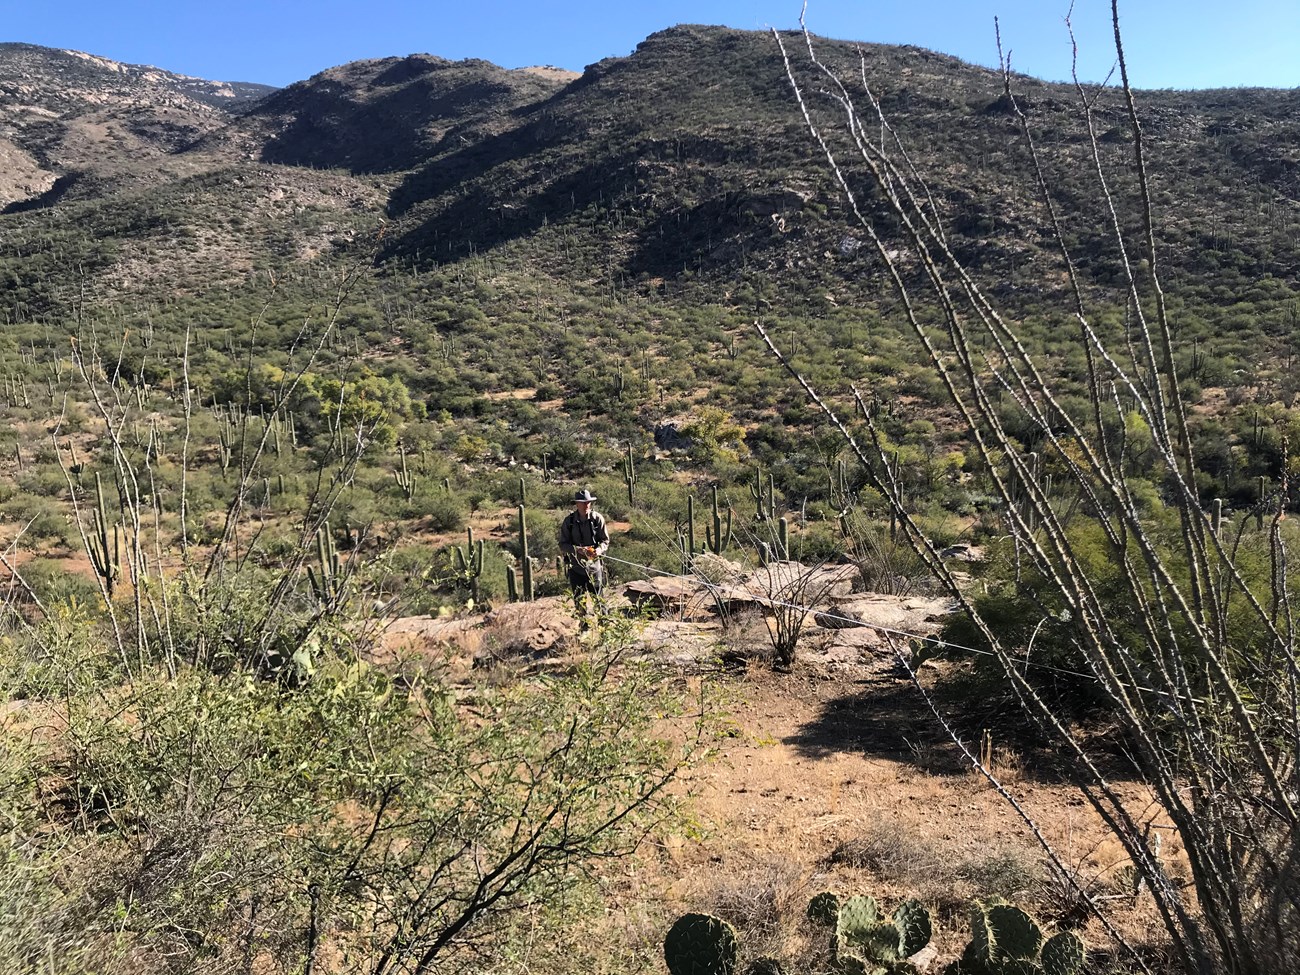 A man using a tape measure to find his distance from a giant saguaro